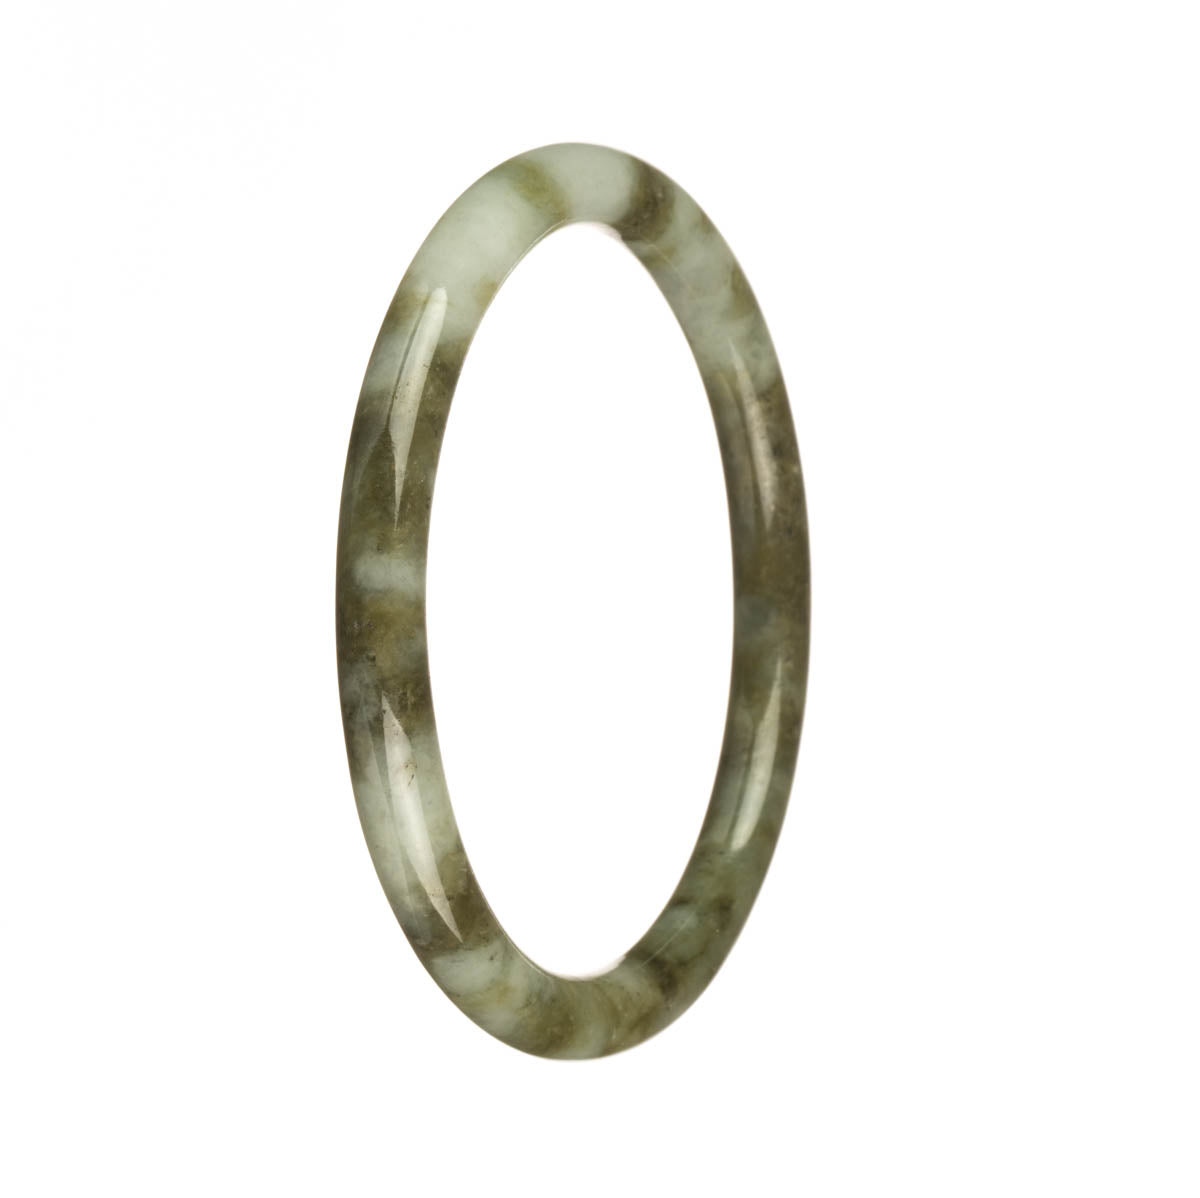 A stunning petite round jadeite bangle bracelet with certified Grade A white color and olive green patterns. Perfect for adding a touch of elegance and sophistication to any outfit.